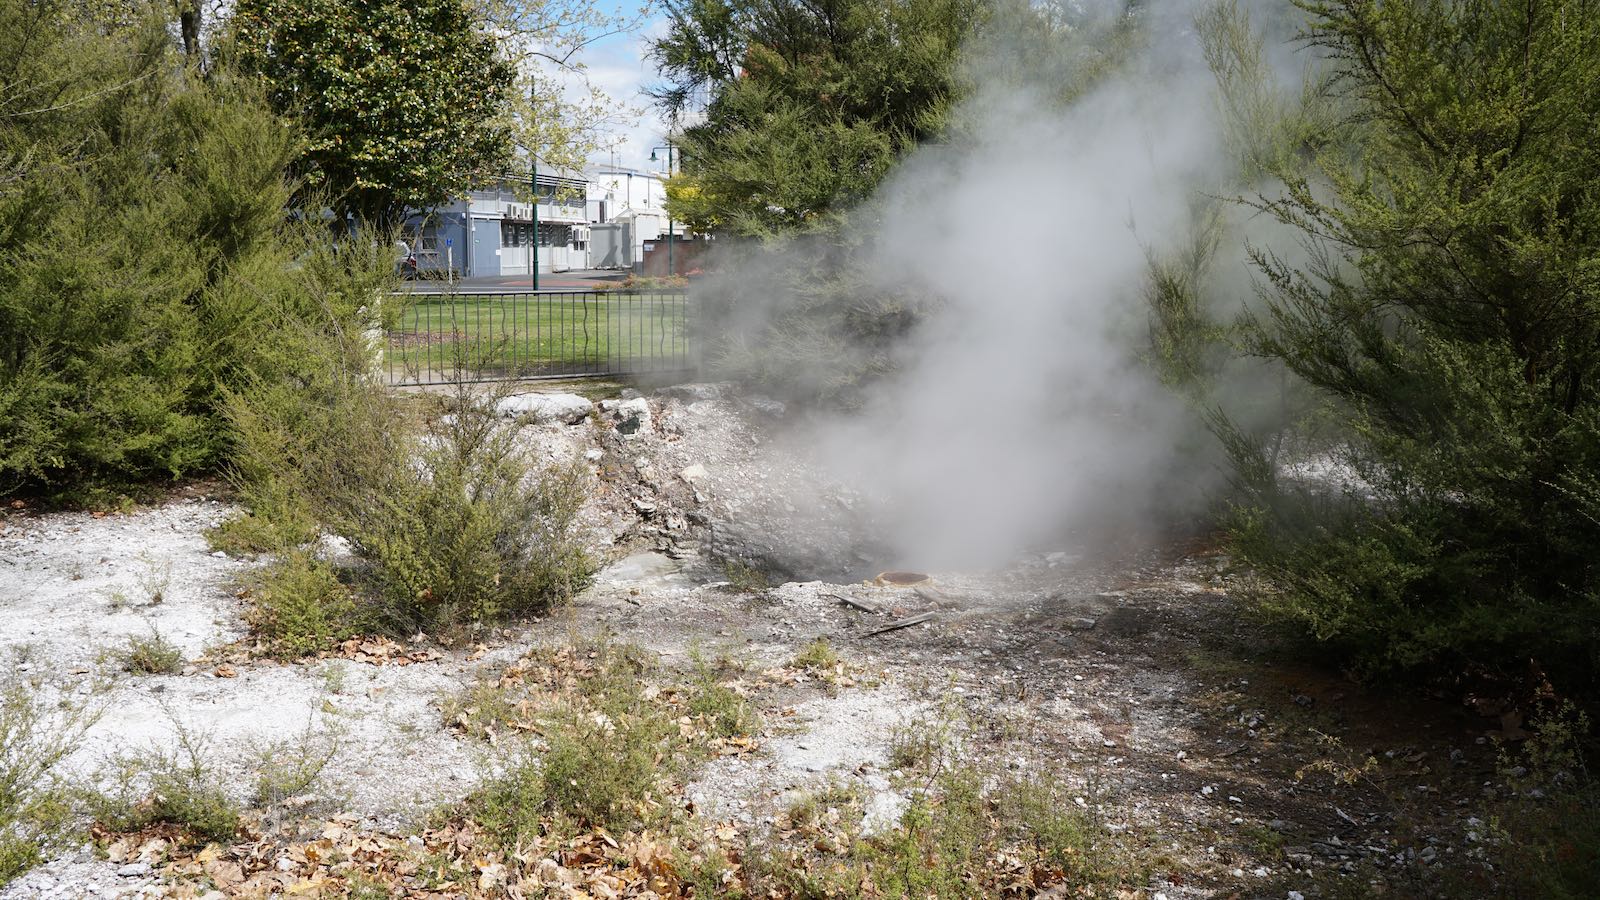 Stuff like this was normal and all over the place. I took a stroll around a small park a block away from my hostel and came across sulfur pools, holes with boiling water and steam vents. I even saw steam rising out of the sewers a few times